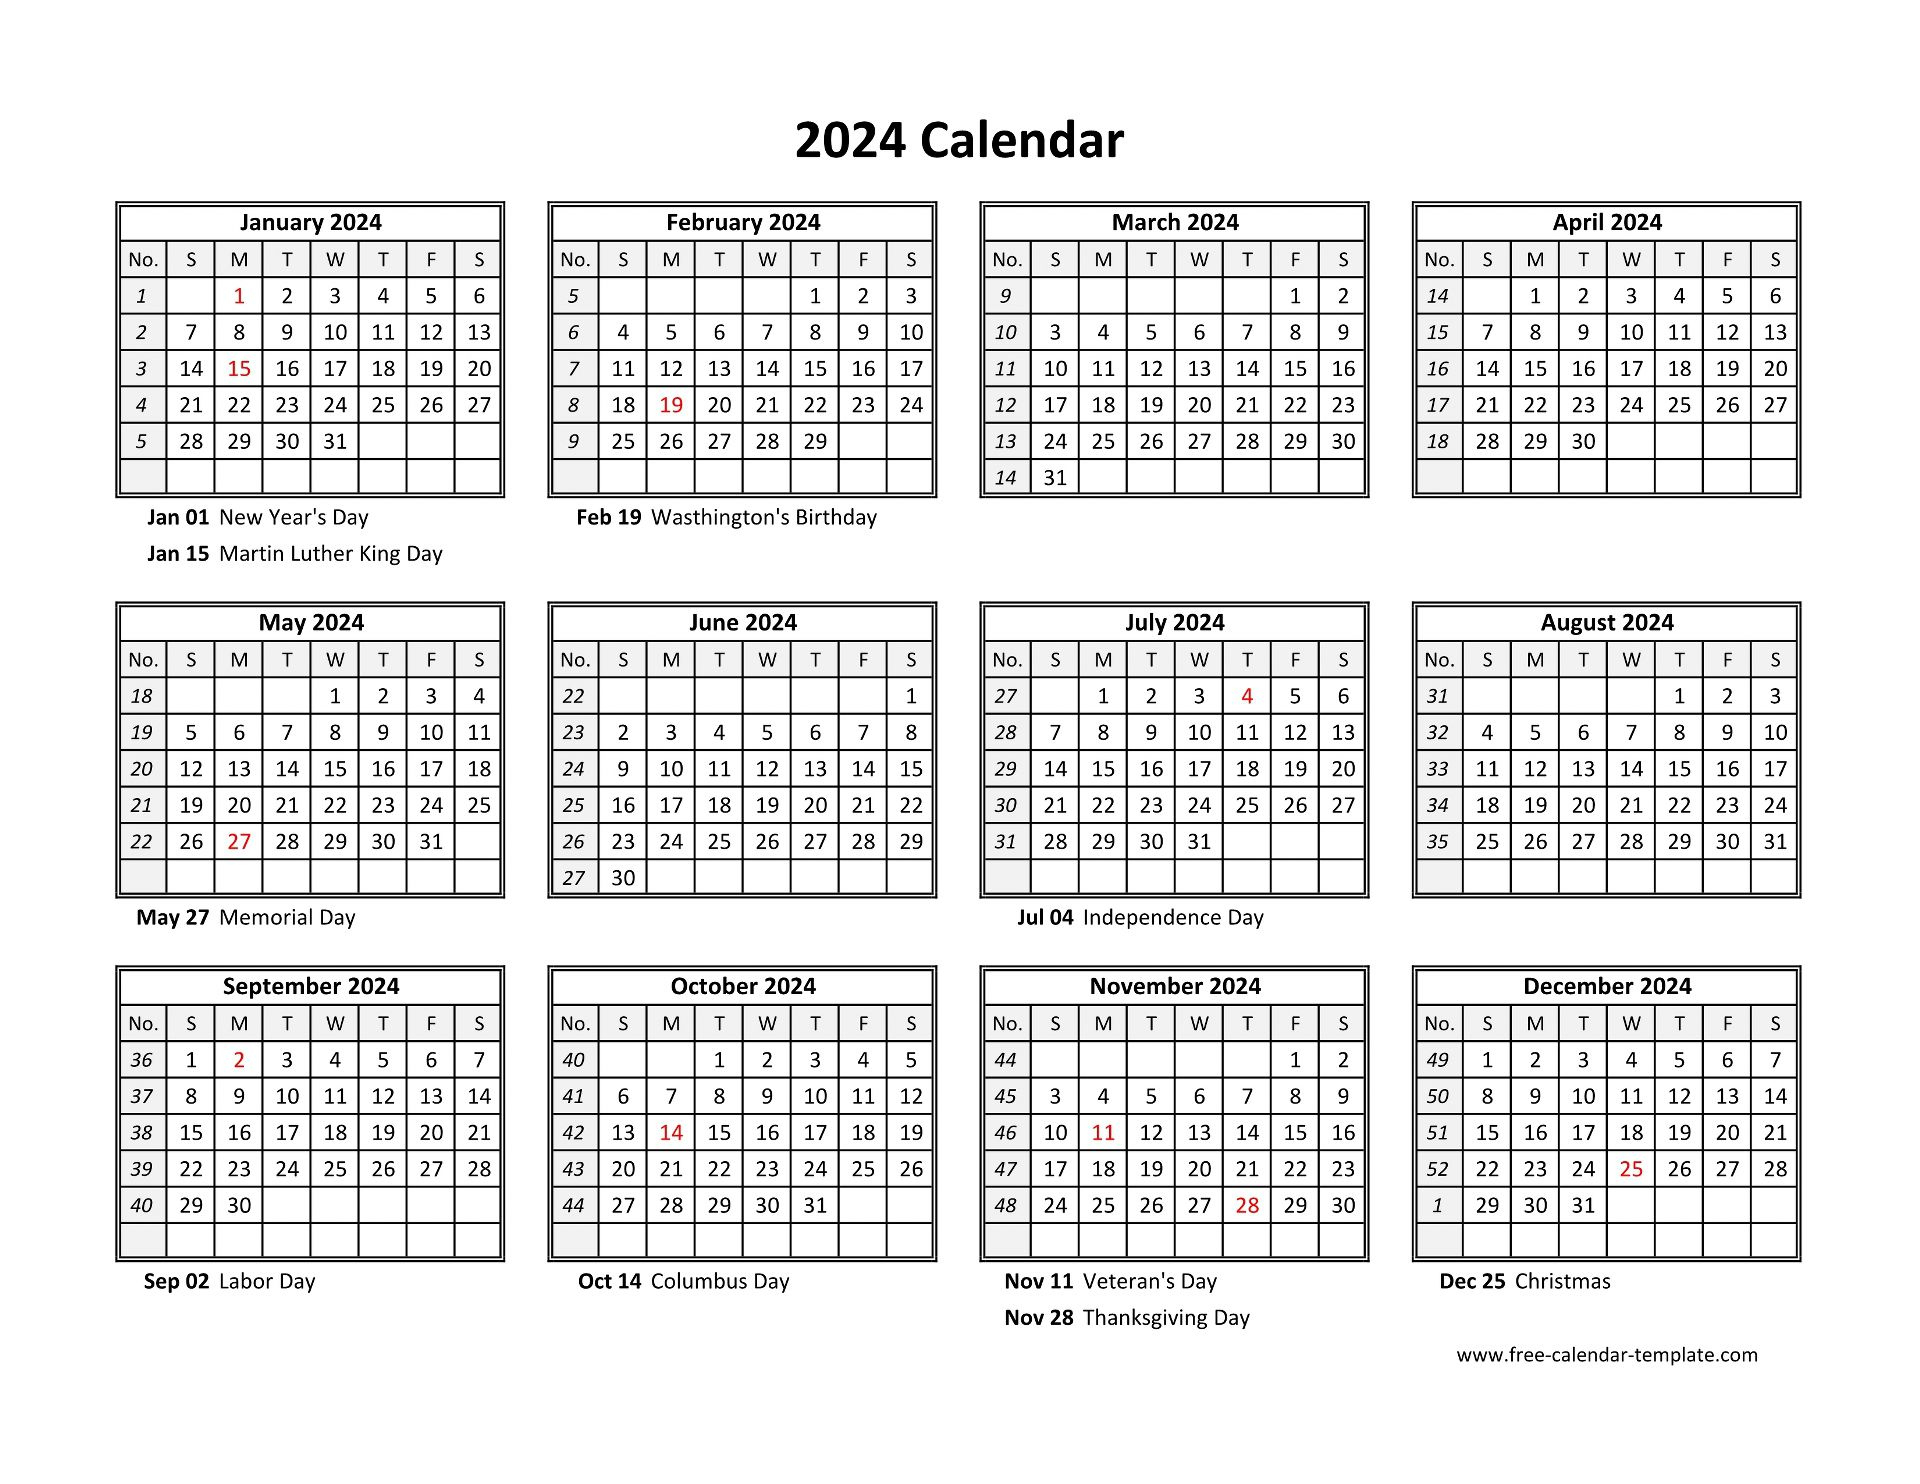 Yearly Calendar 2024 Printable With Federal Holidays | Free | Calendar 2024 Printable For Free